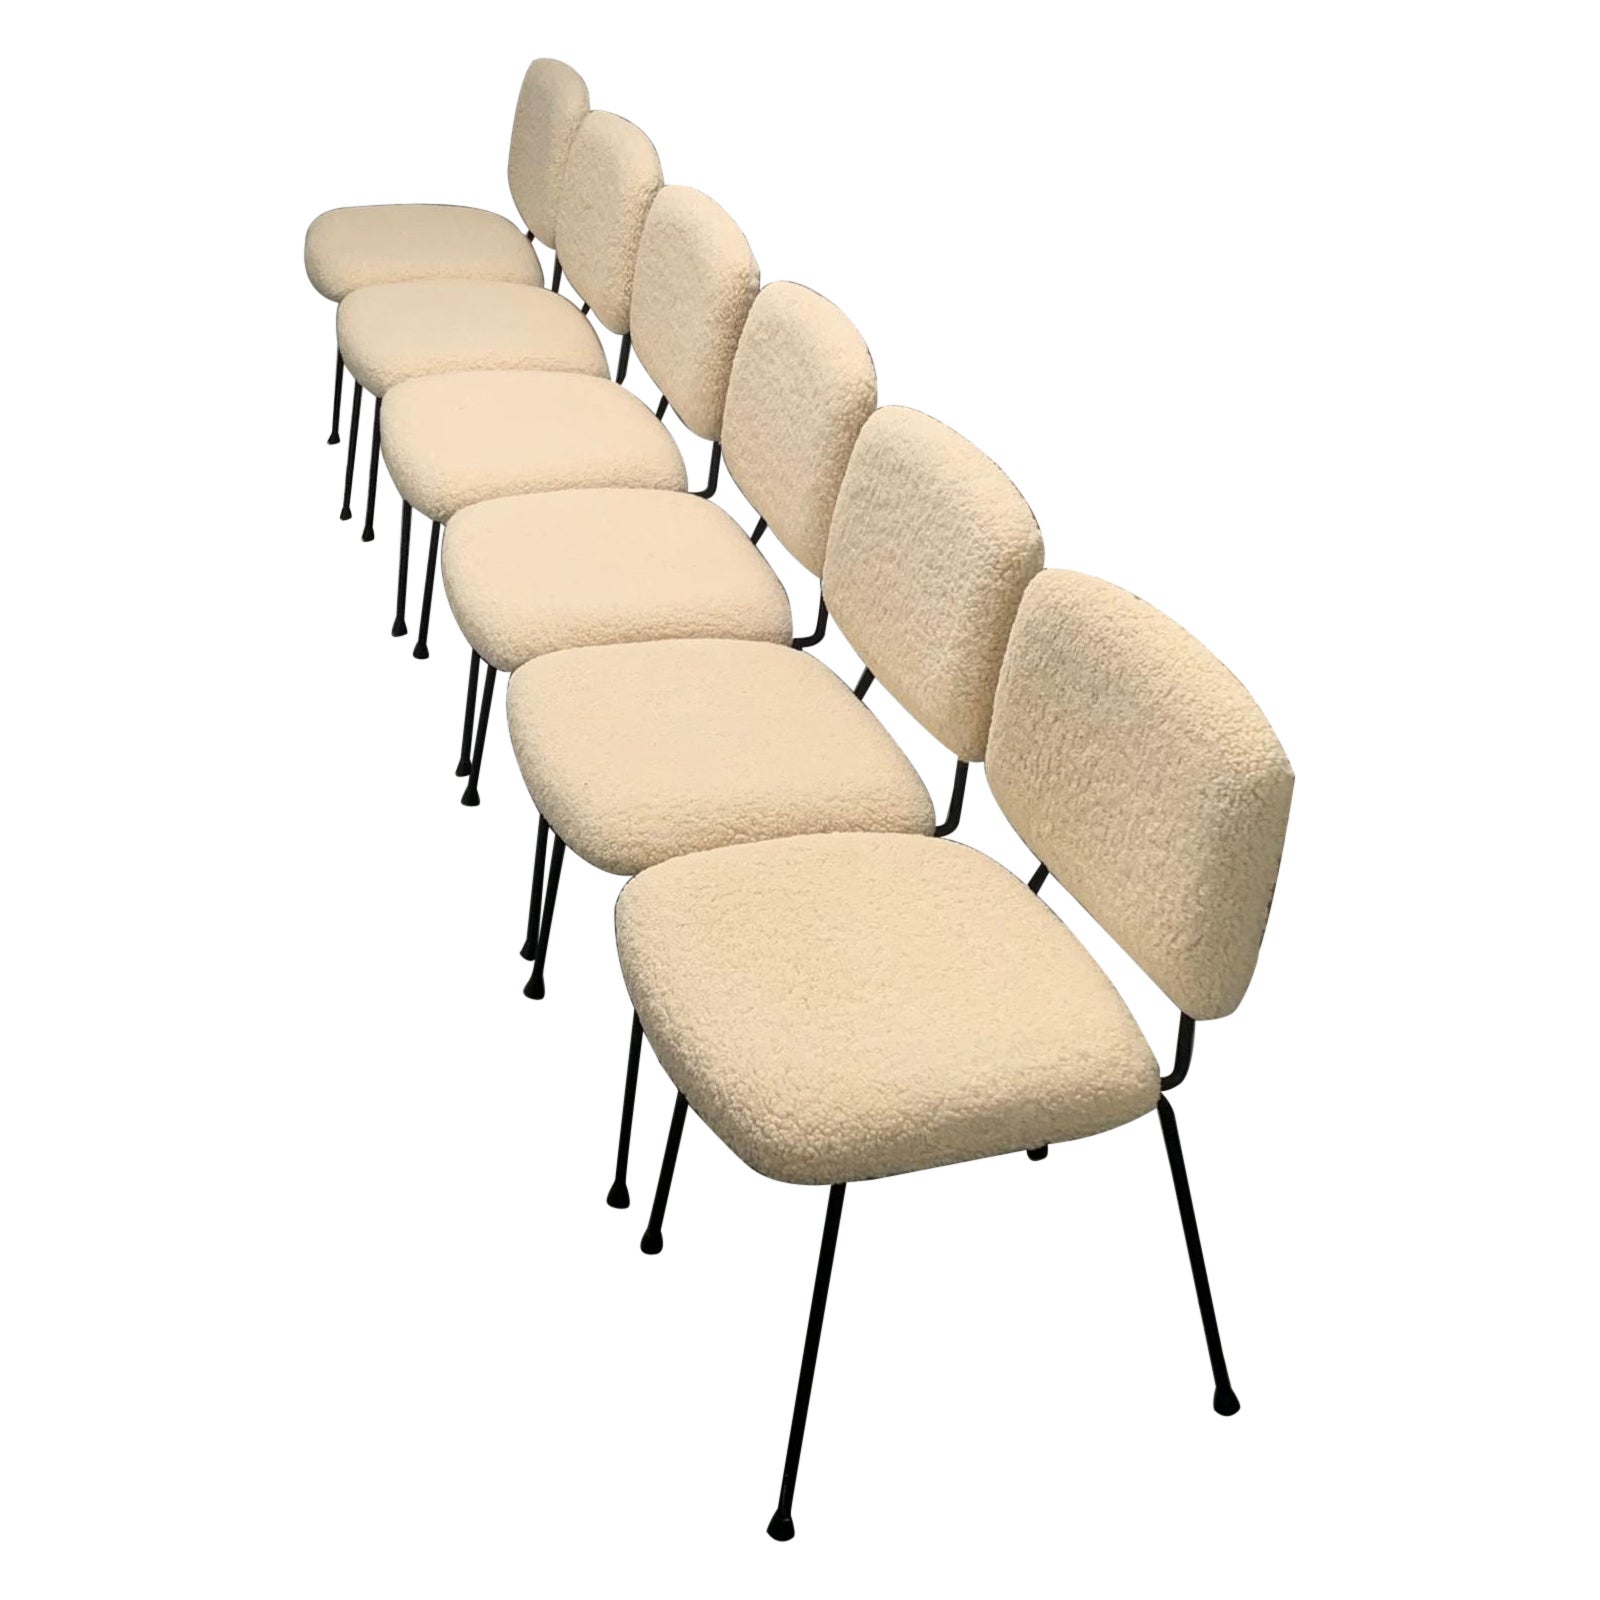 Set of six chairs "CM 196" by Pierre Paulin 1960's Thonet edition 